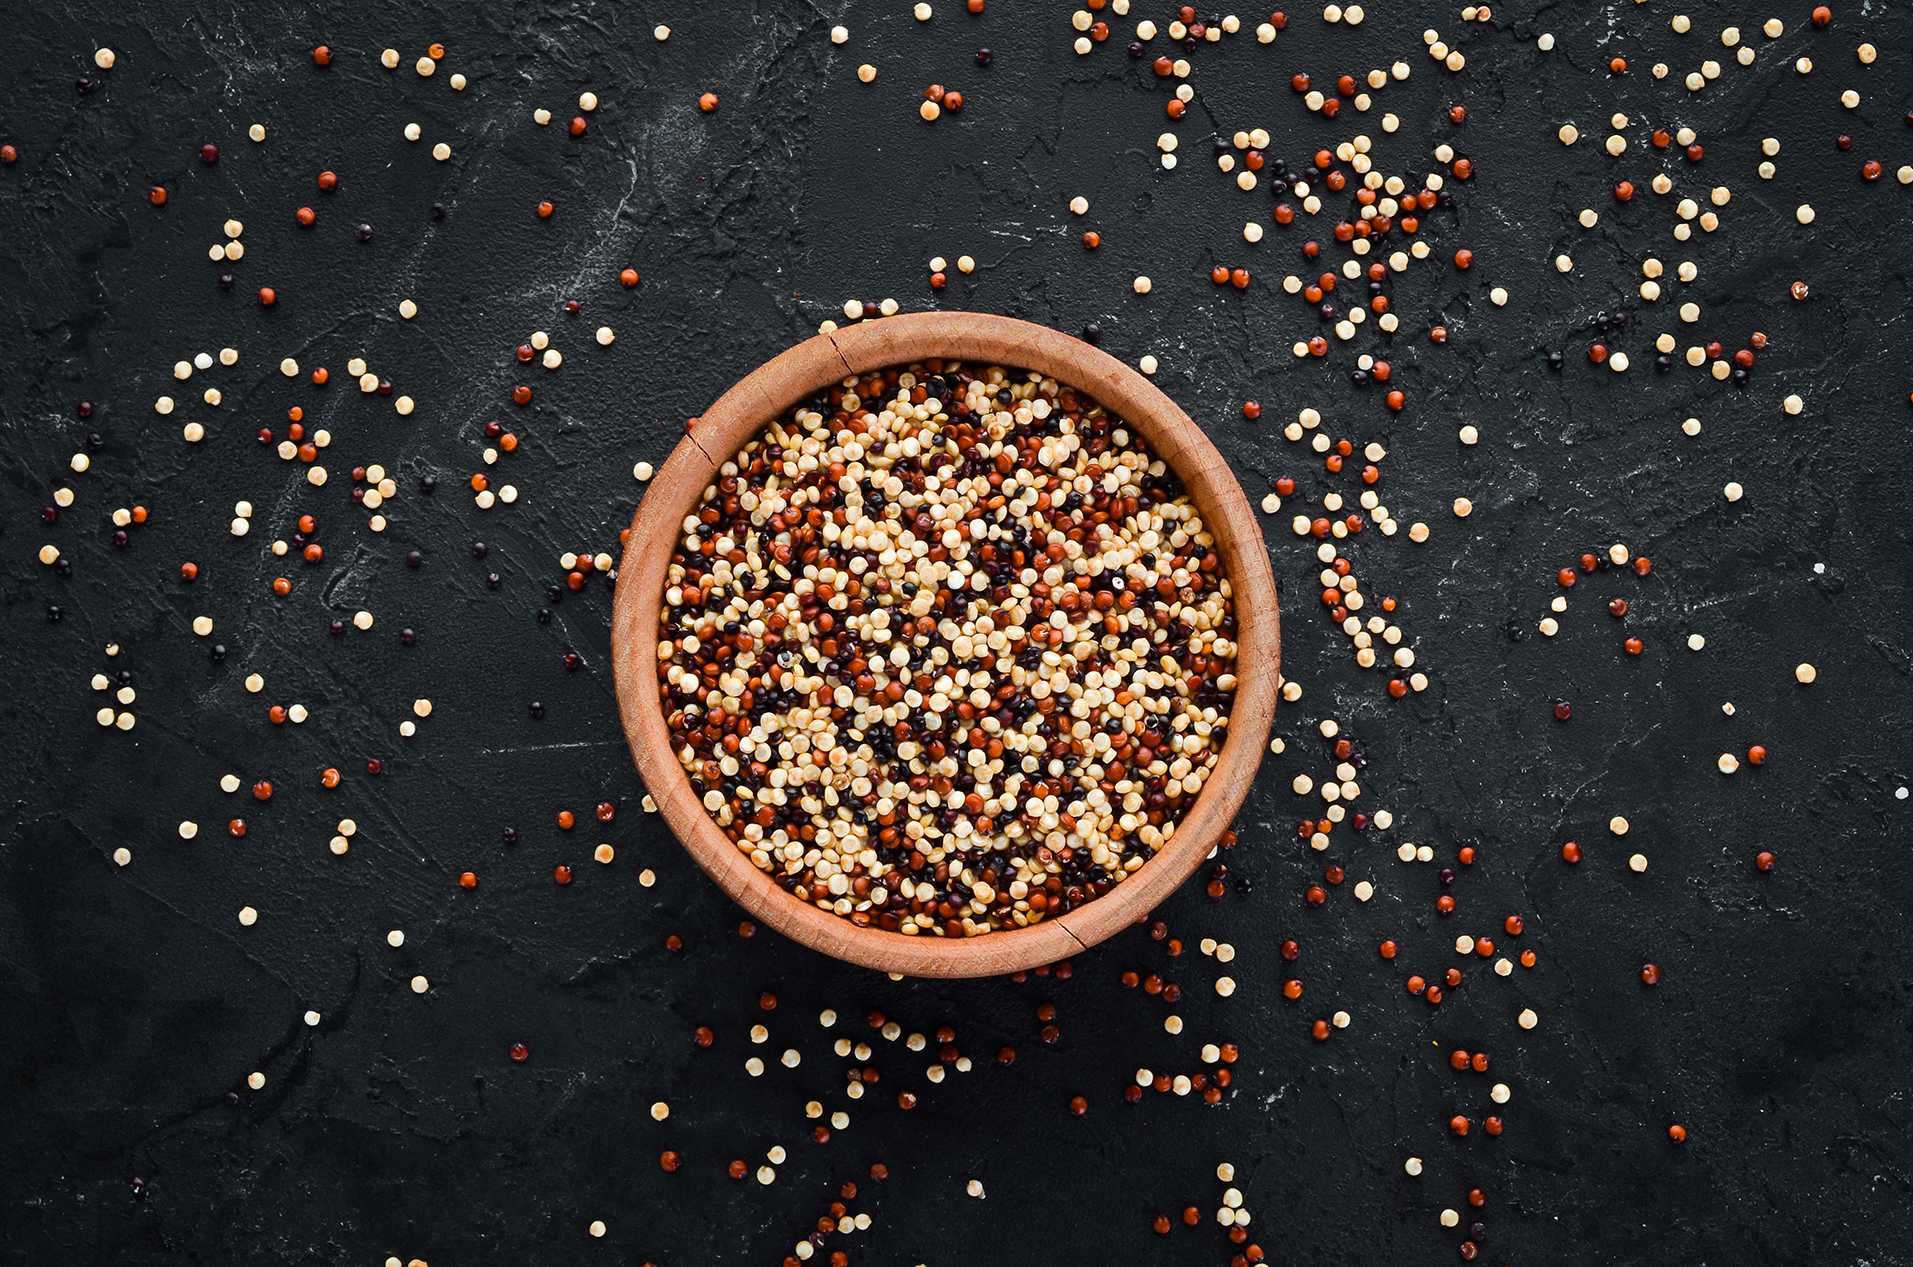 Red and white quinoa in wooden bowl on black granite counter